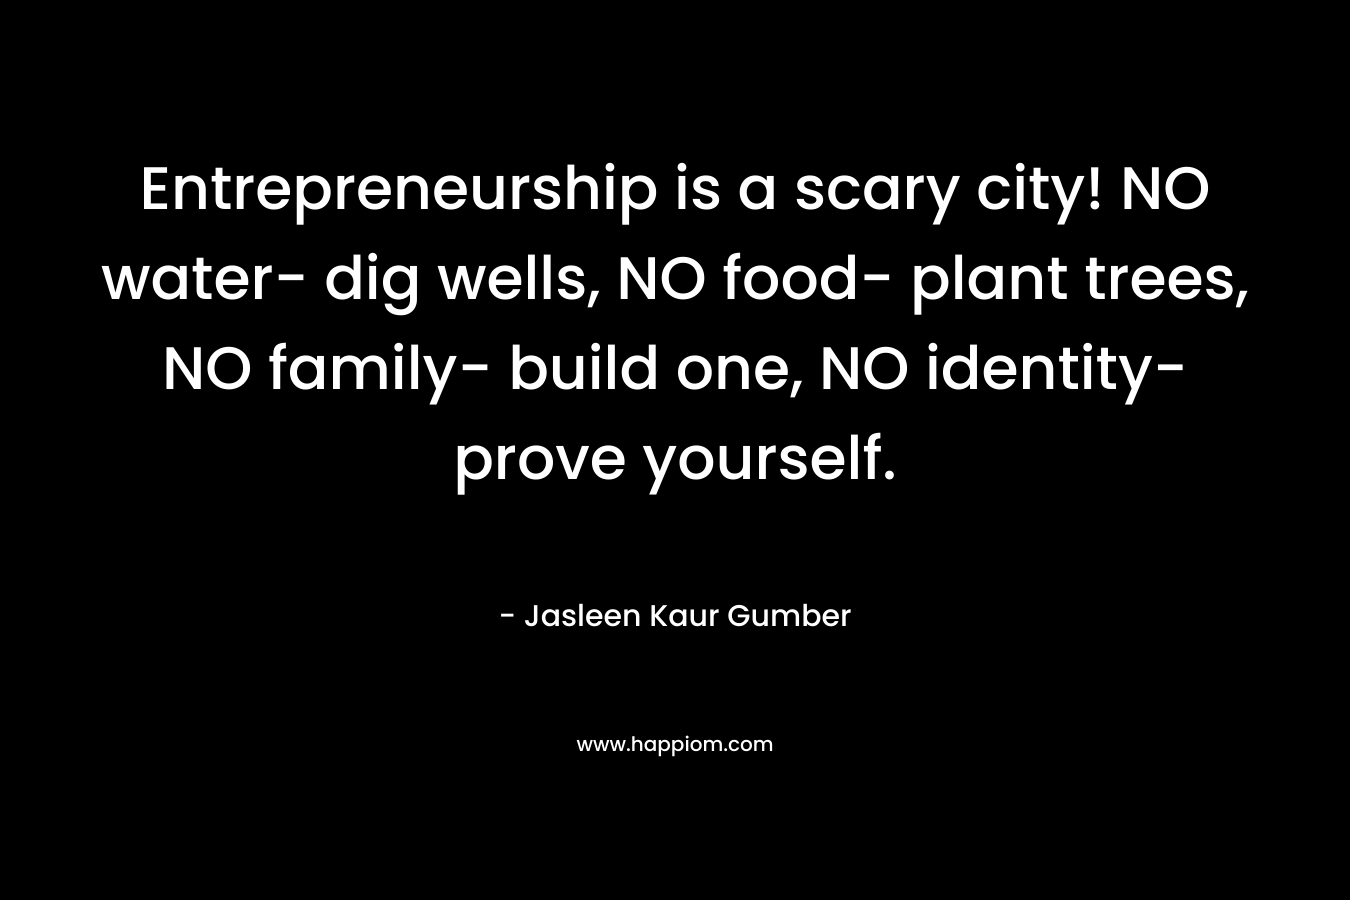 Entrepreneurship is a scary city! NO water- dig wells, NO food- plant trees, NO family- build one, NO identity- prove yourself. – Jasleen Kaur Gumber